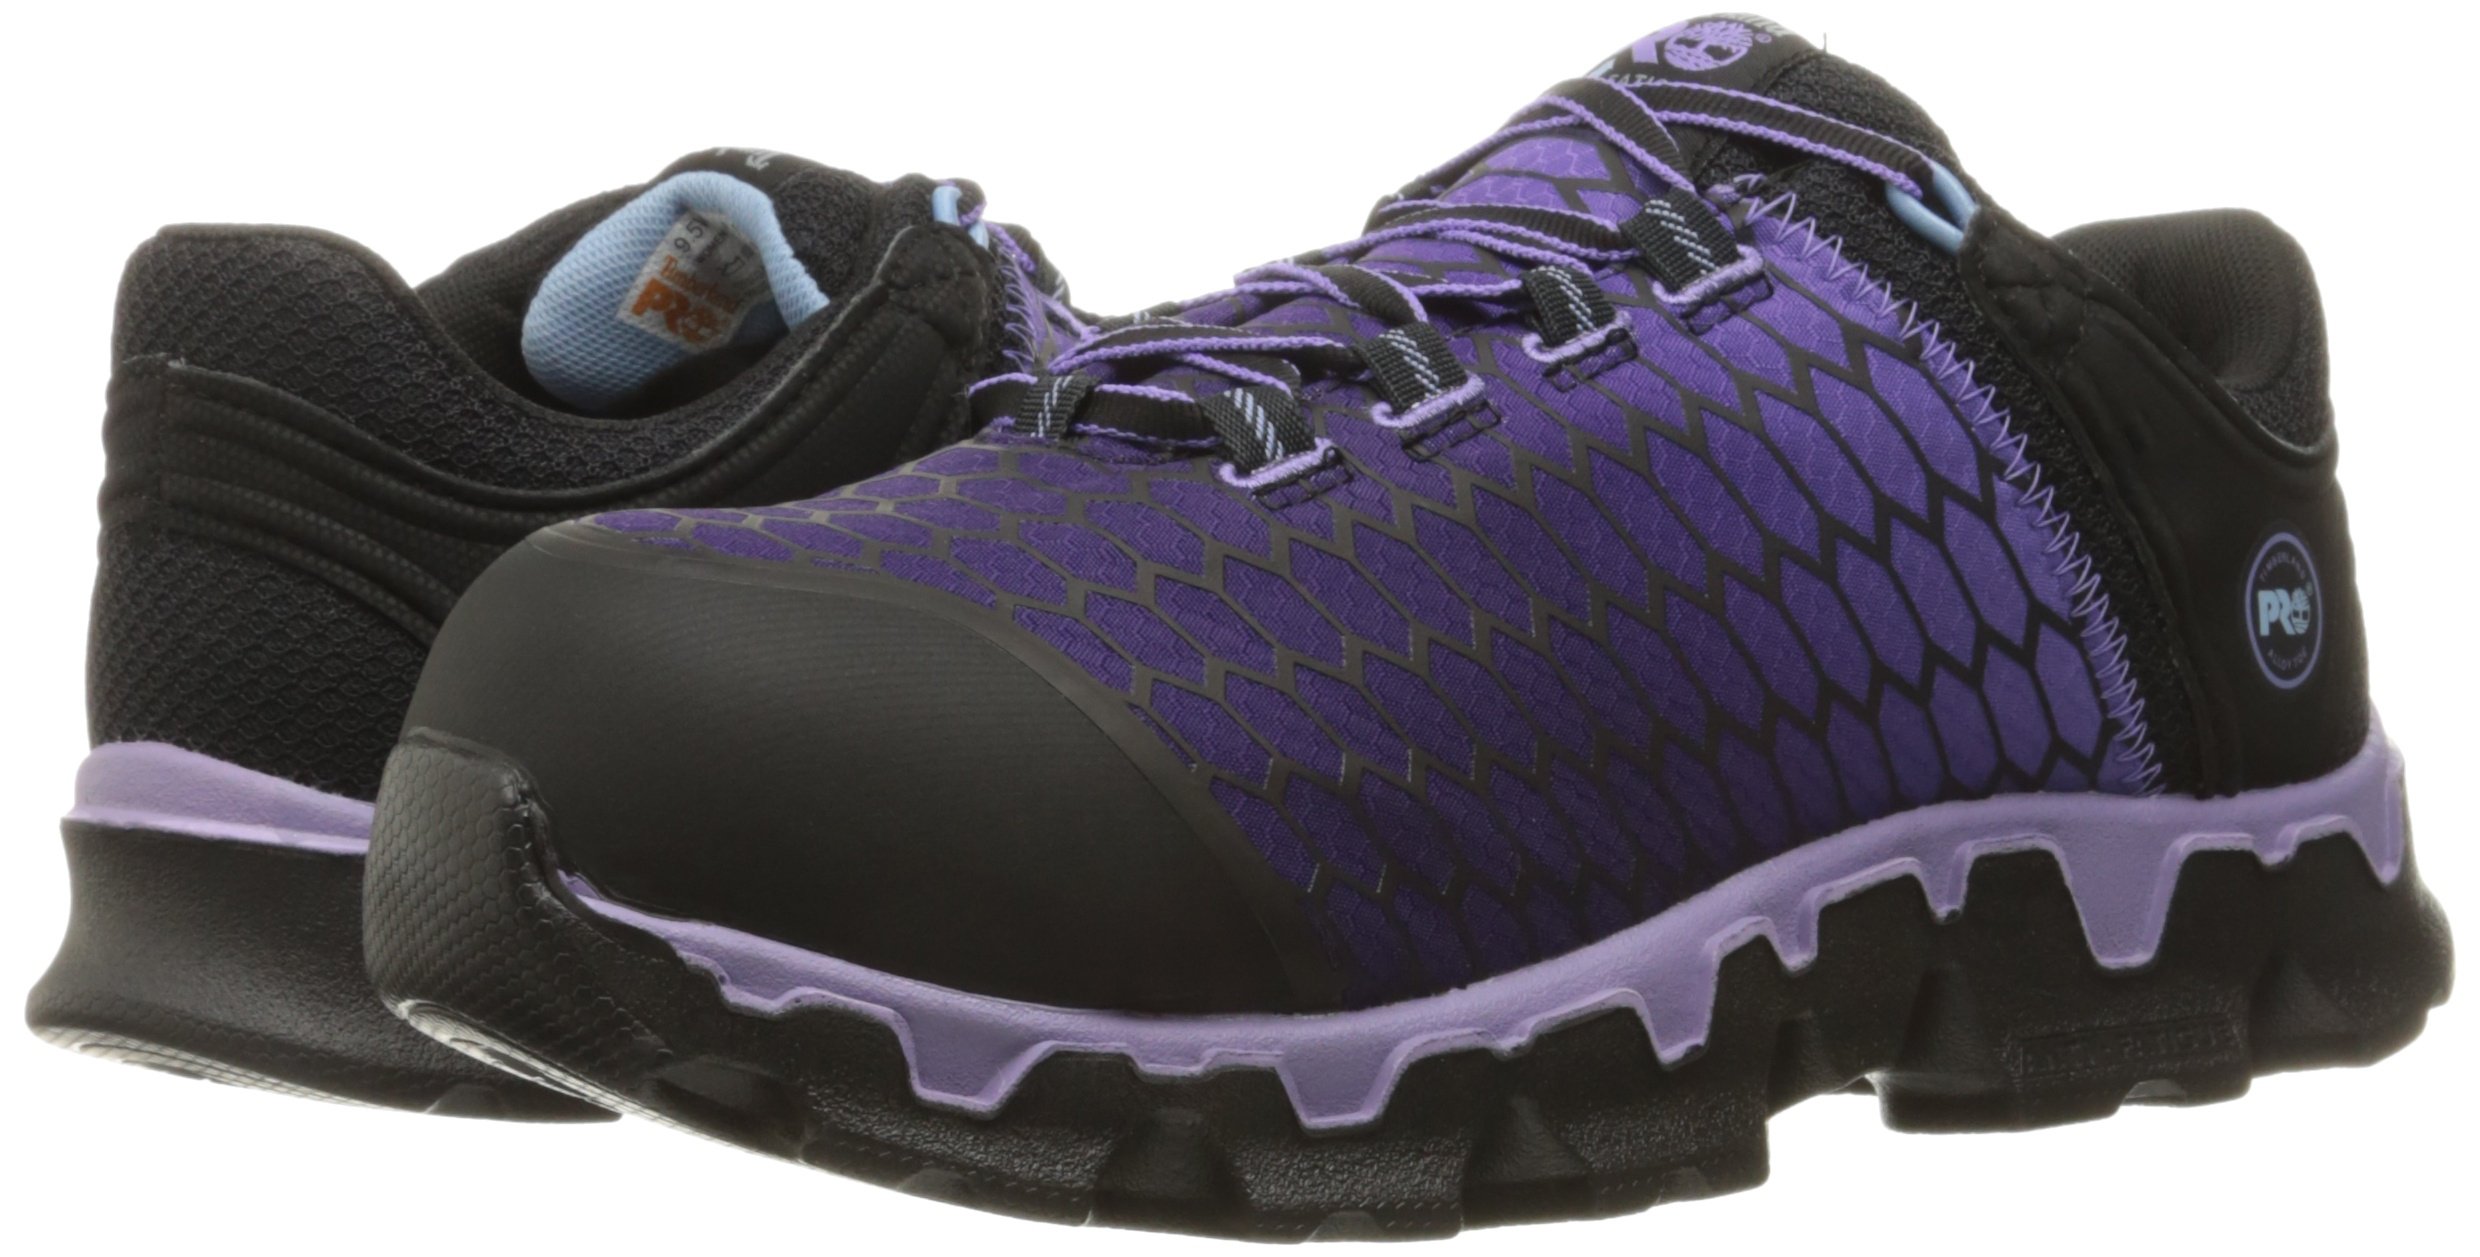 Timberland PRO Women's Powertrain Sport Alloy Toe SD+ Industrial and Construction Shoe